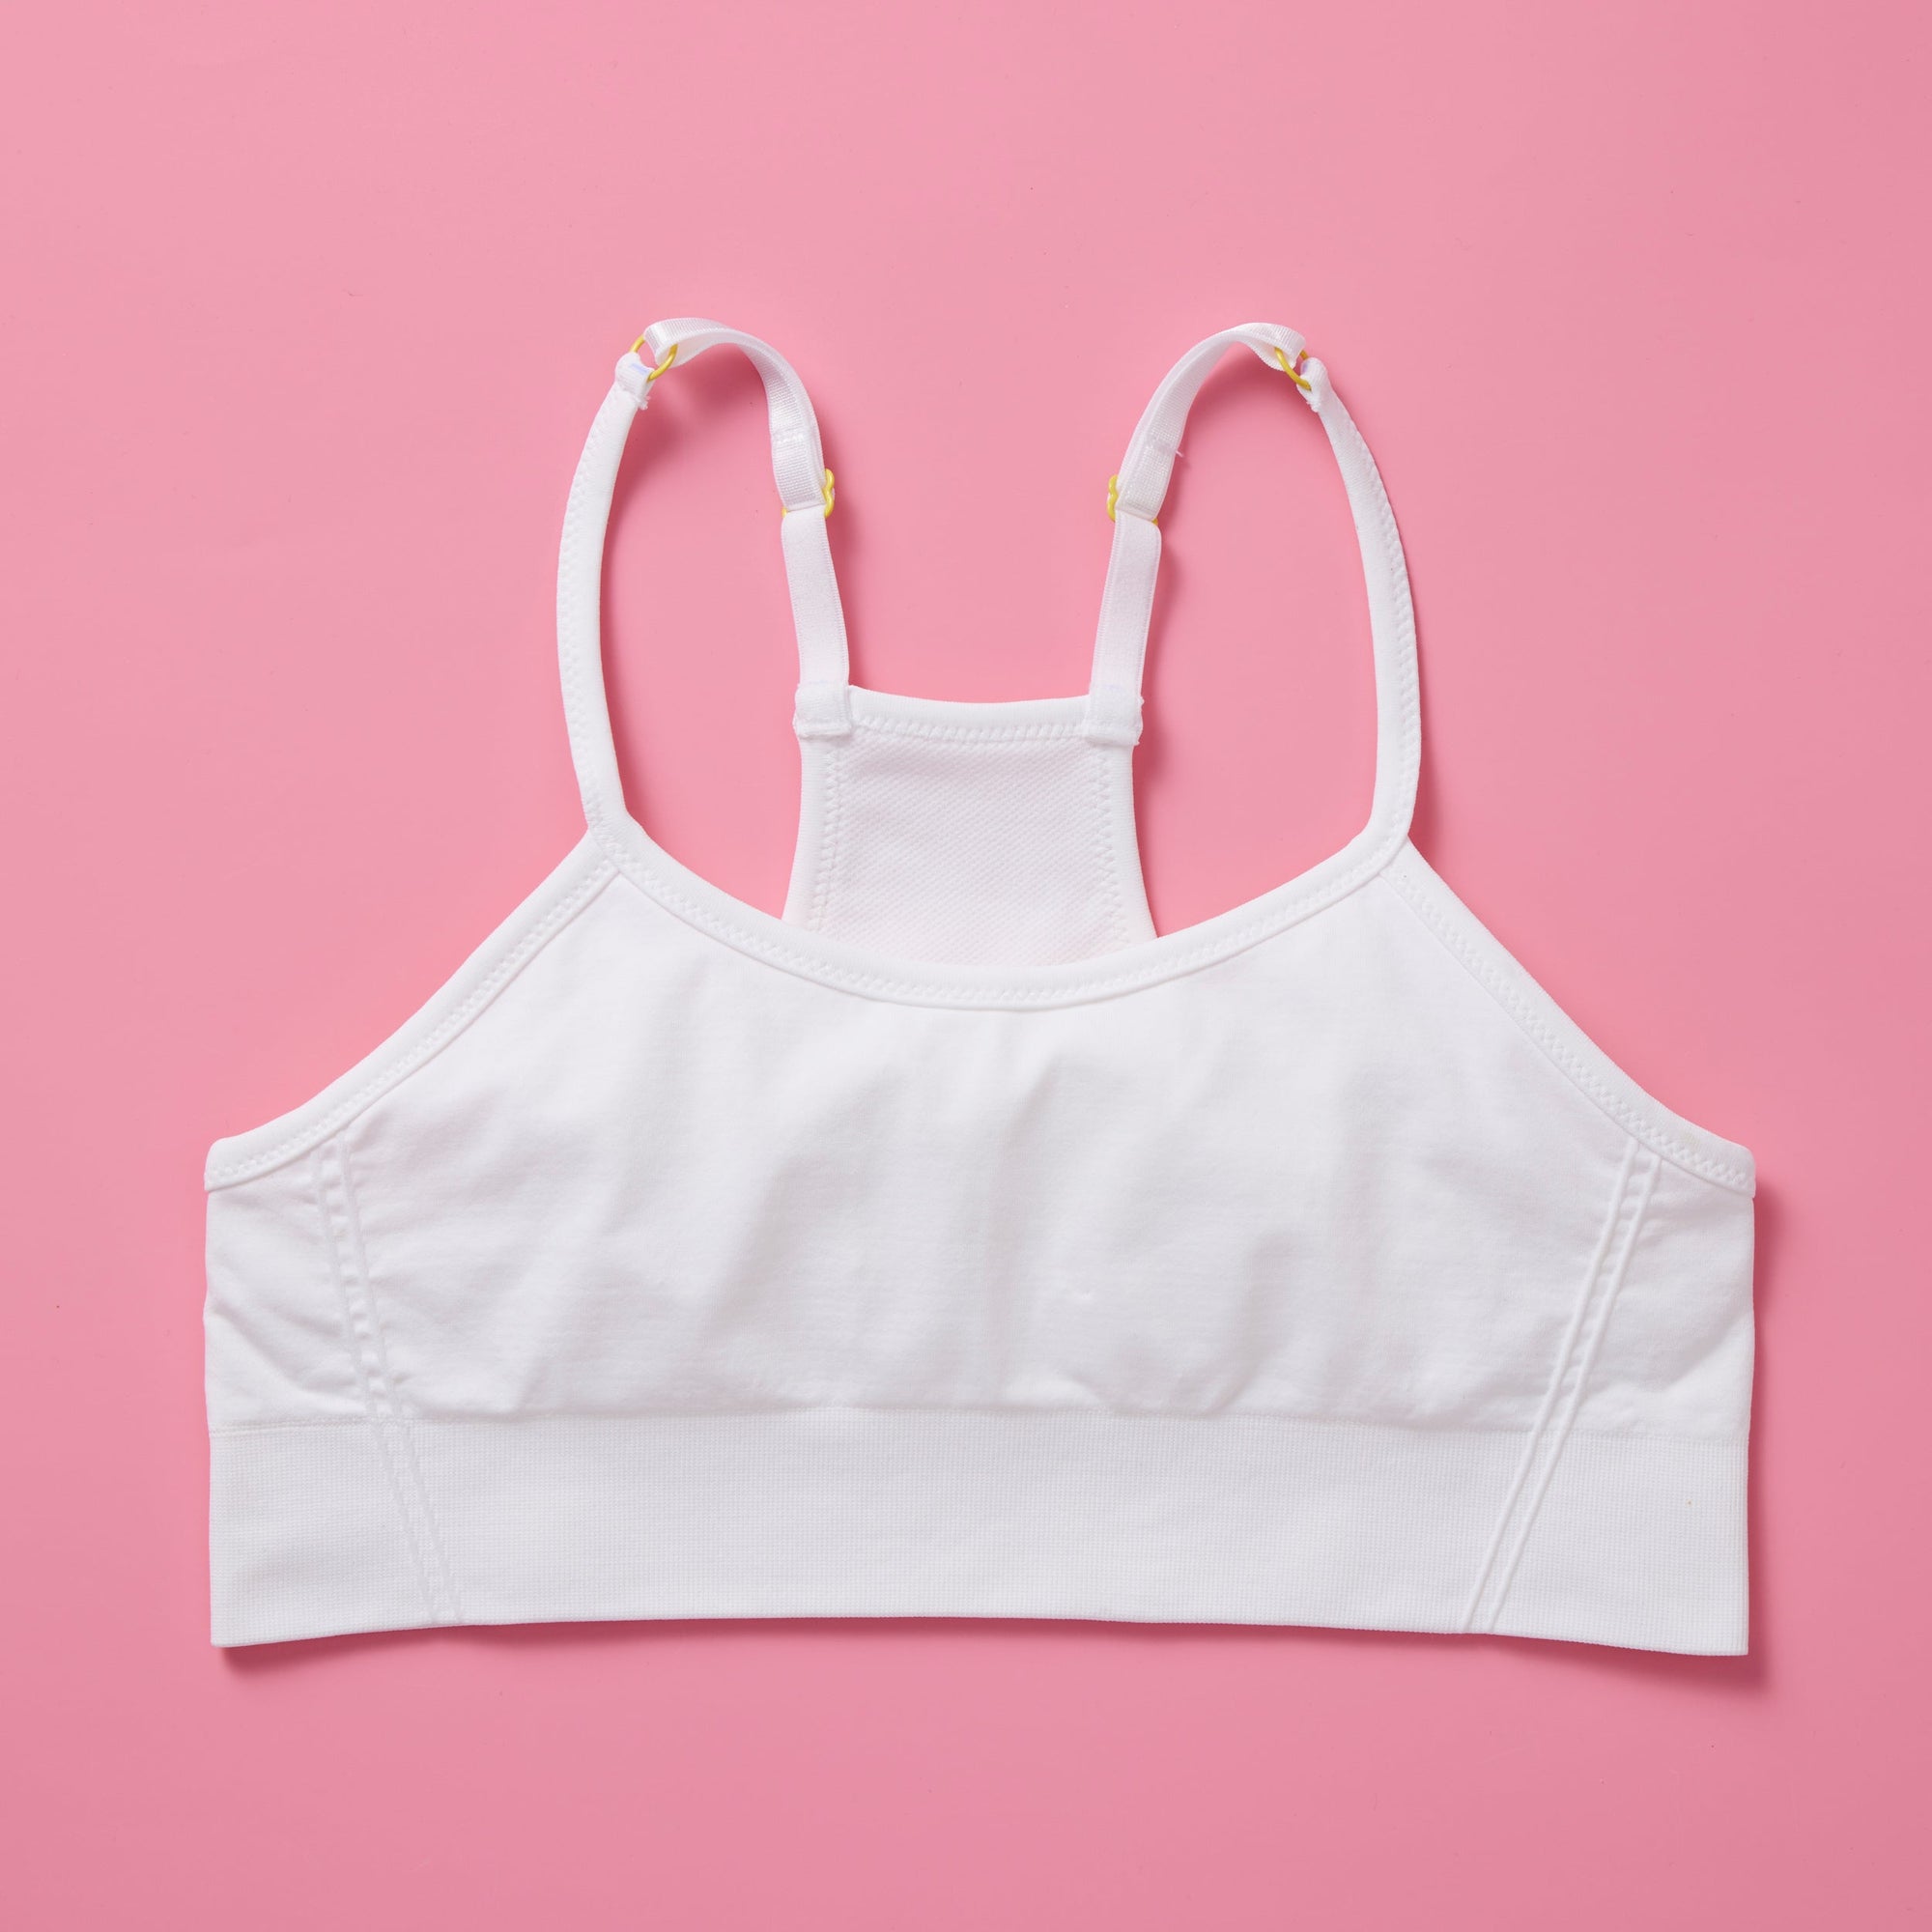 Tween Bras - Yellowberry Bras for Tweens and Girls. Best bra for girls  Tagged earth